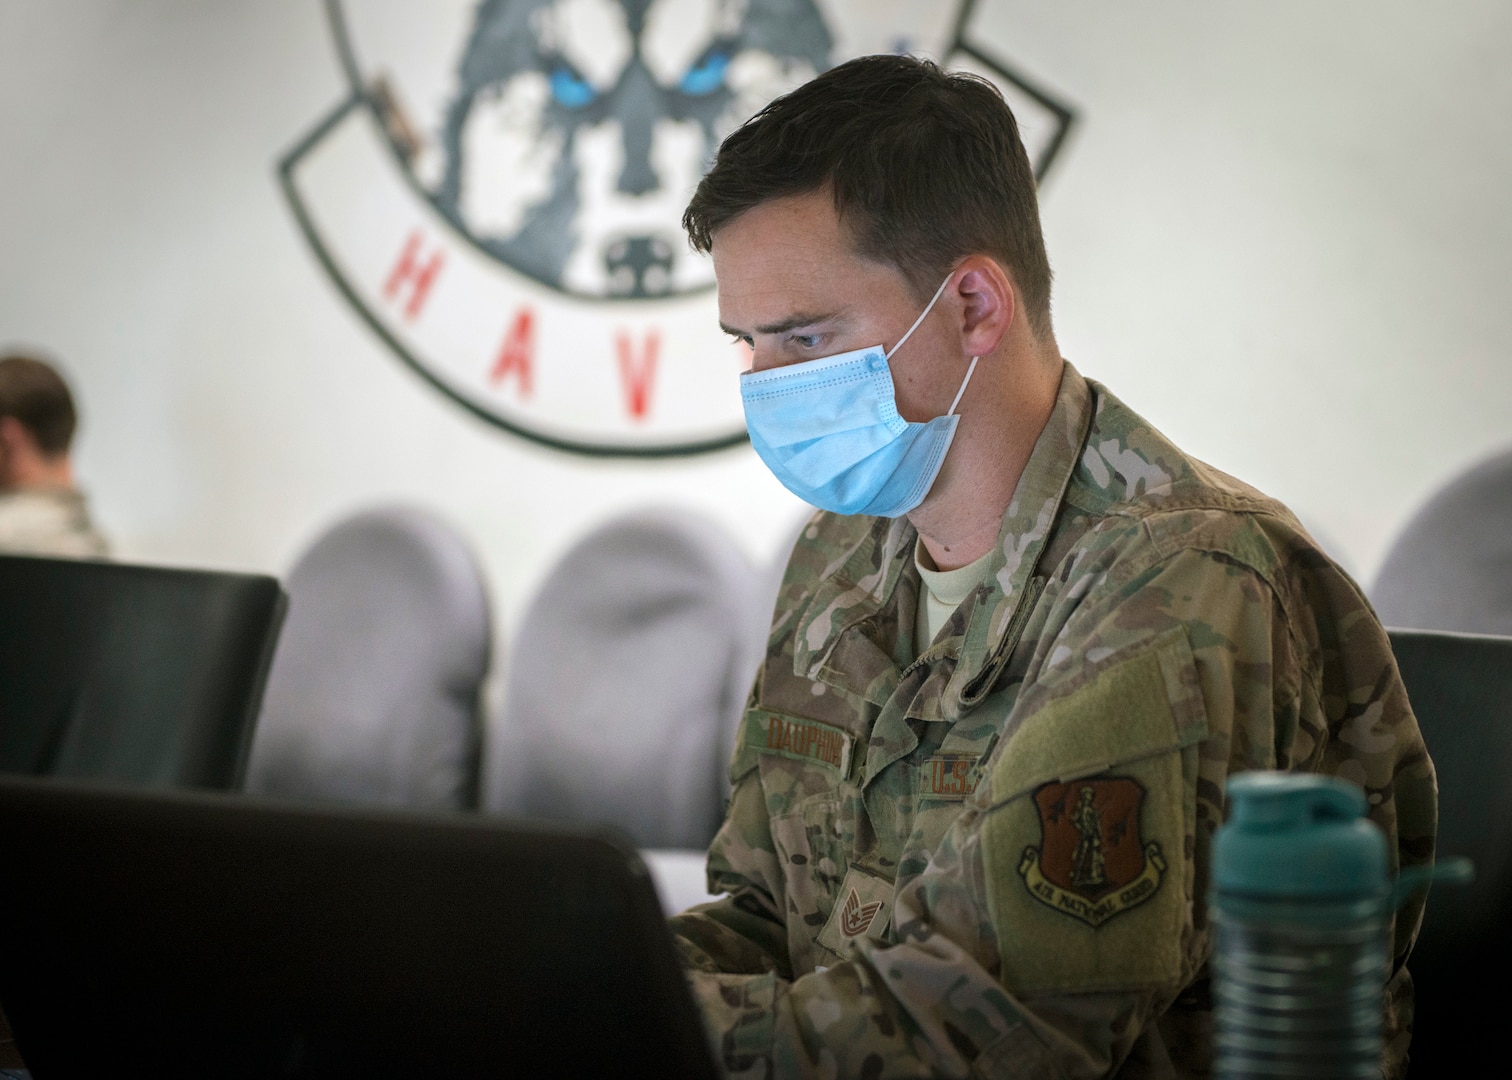 Tech. Sgt. Bryan Dauphinais, 103rd Communications Flight cyber transport journeyman, analyzes simulated cyberattacks during exercise Cyber Yankee at the Windsor Locks Readiness Center, Windsor Locks, Connecticut, July 30, 2020.